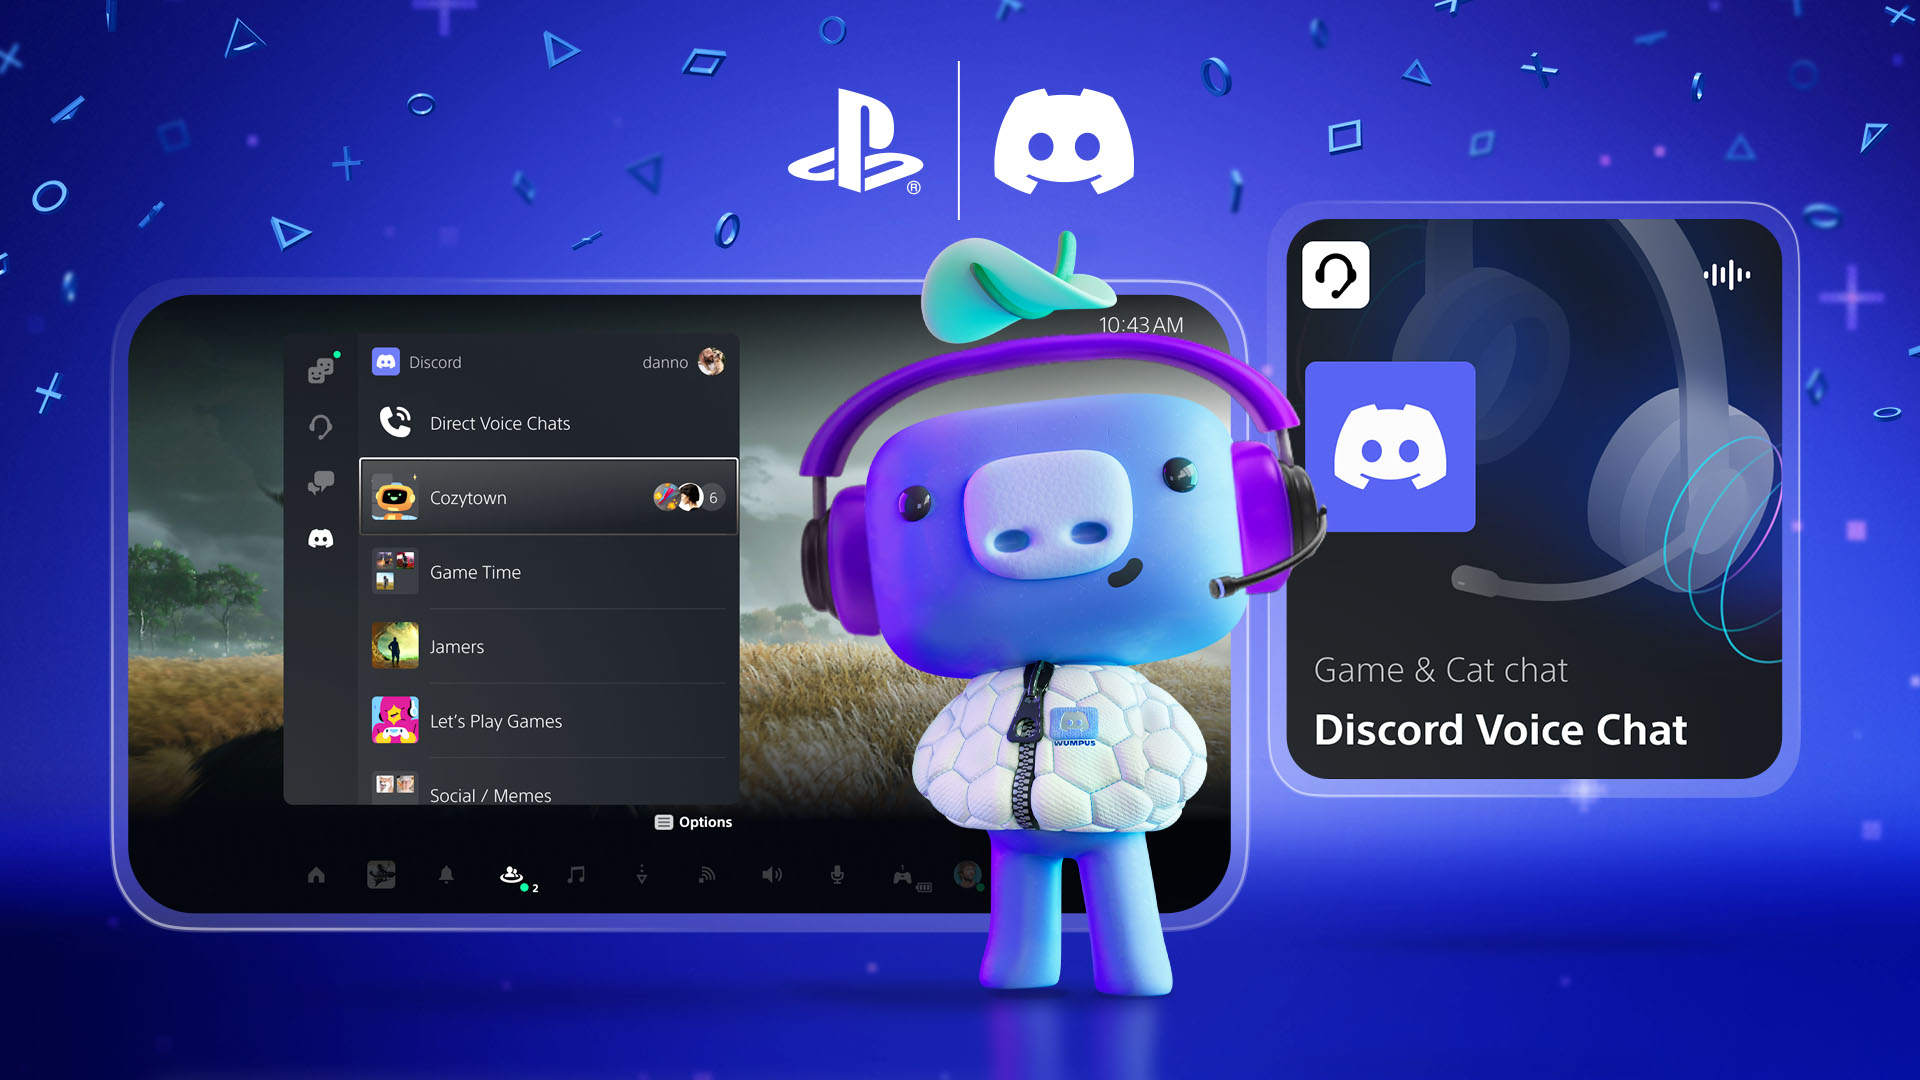 Discord Voice Chat now on PlayStation 5: how to set it up [Video]